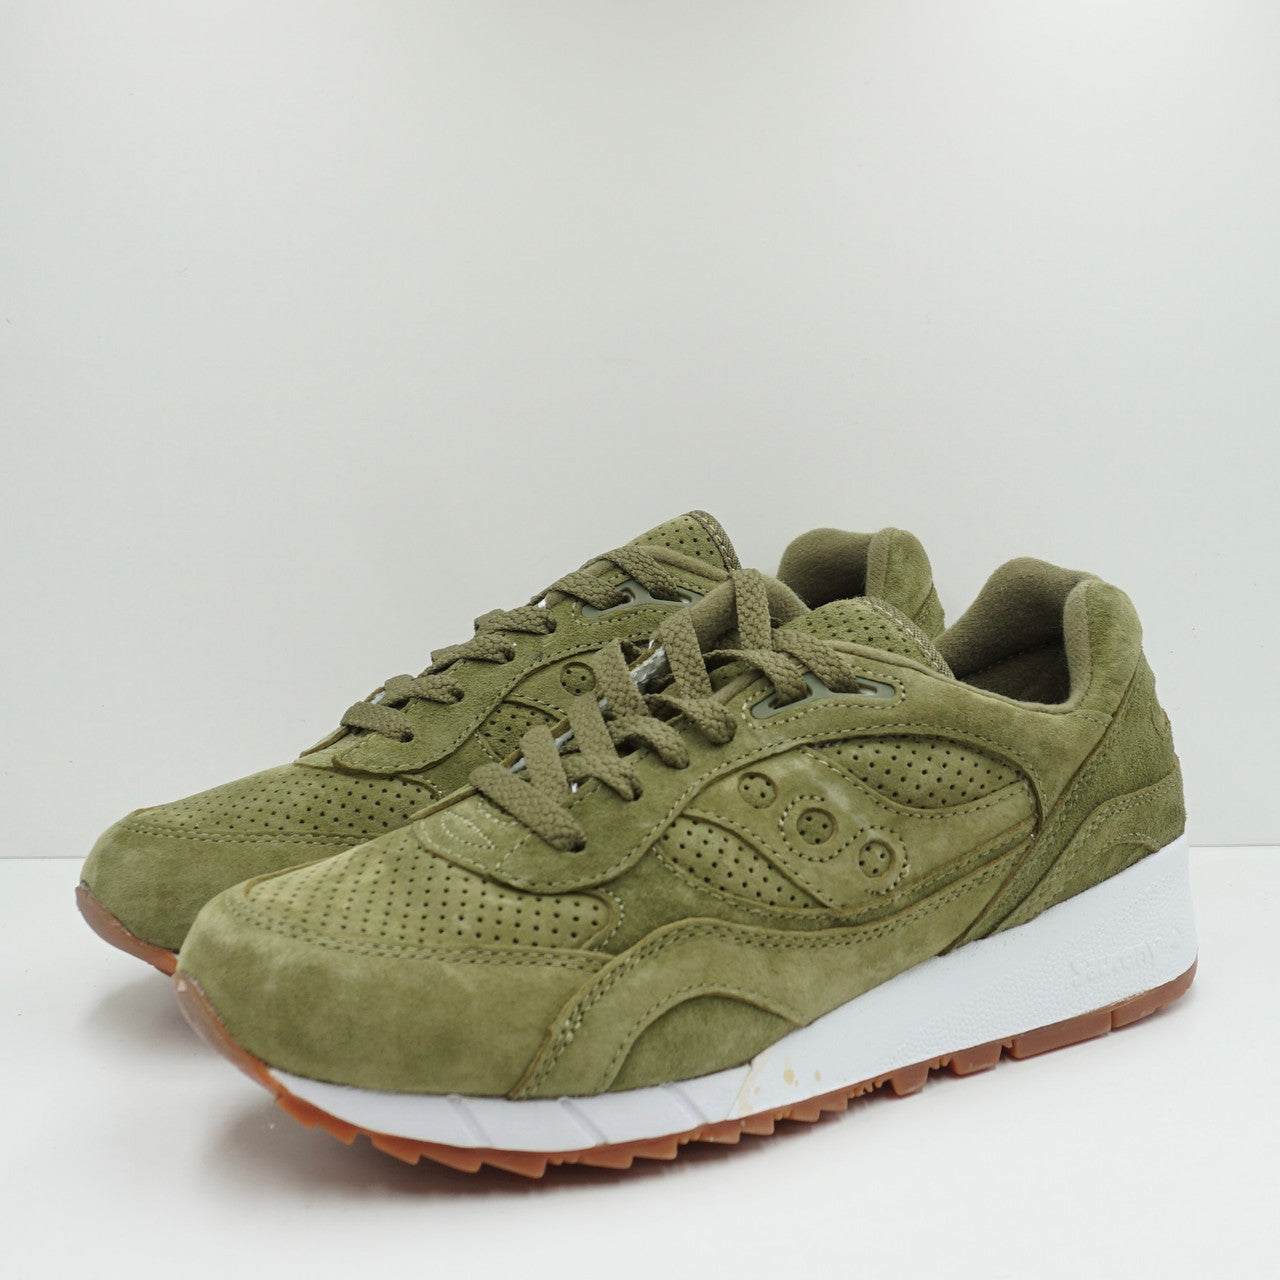 Saucony Shadow 6000 Olive Suede (Packer Shoes)